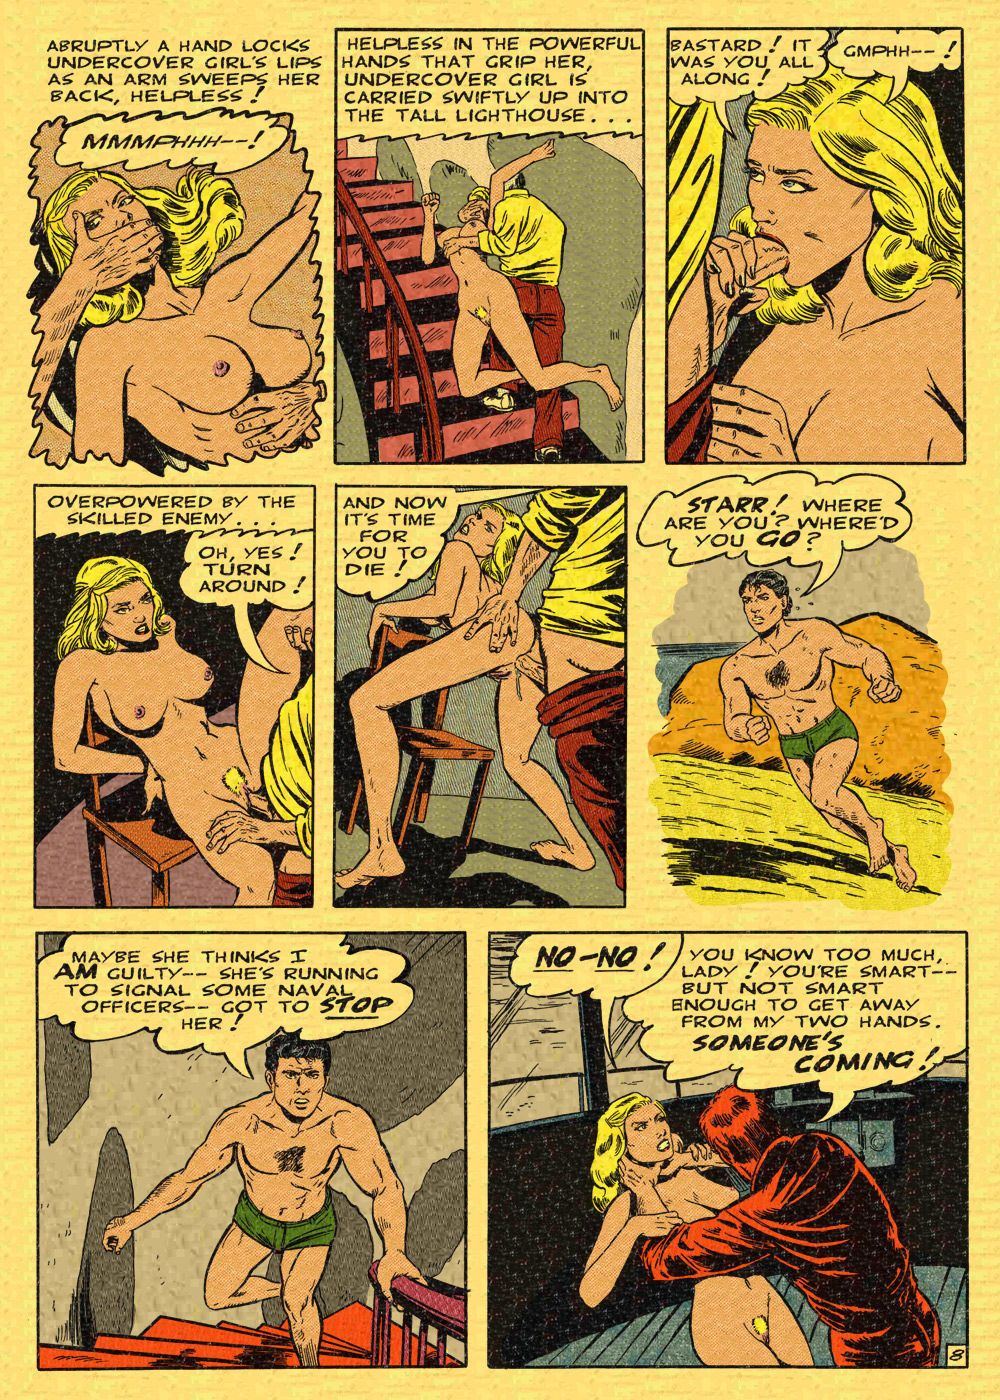 The Wertham Files Undercover Girl